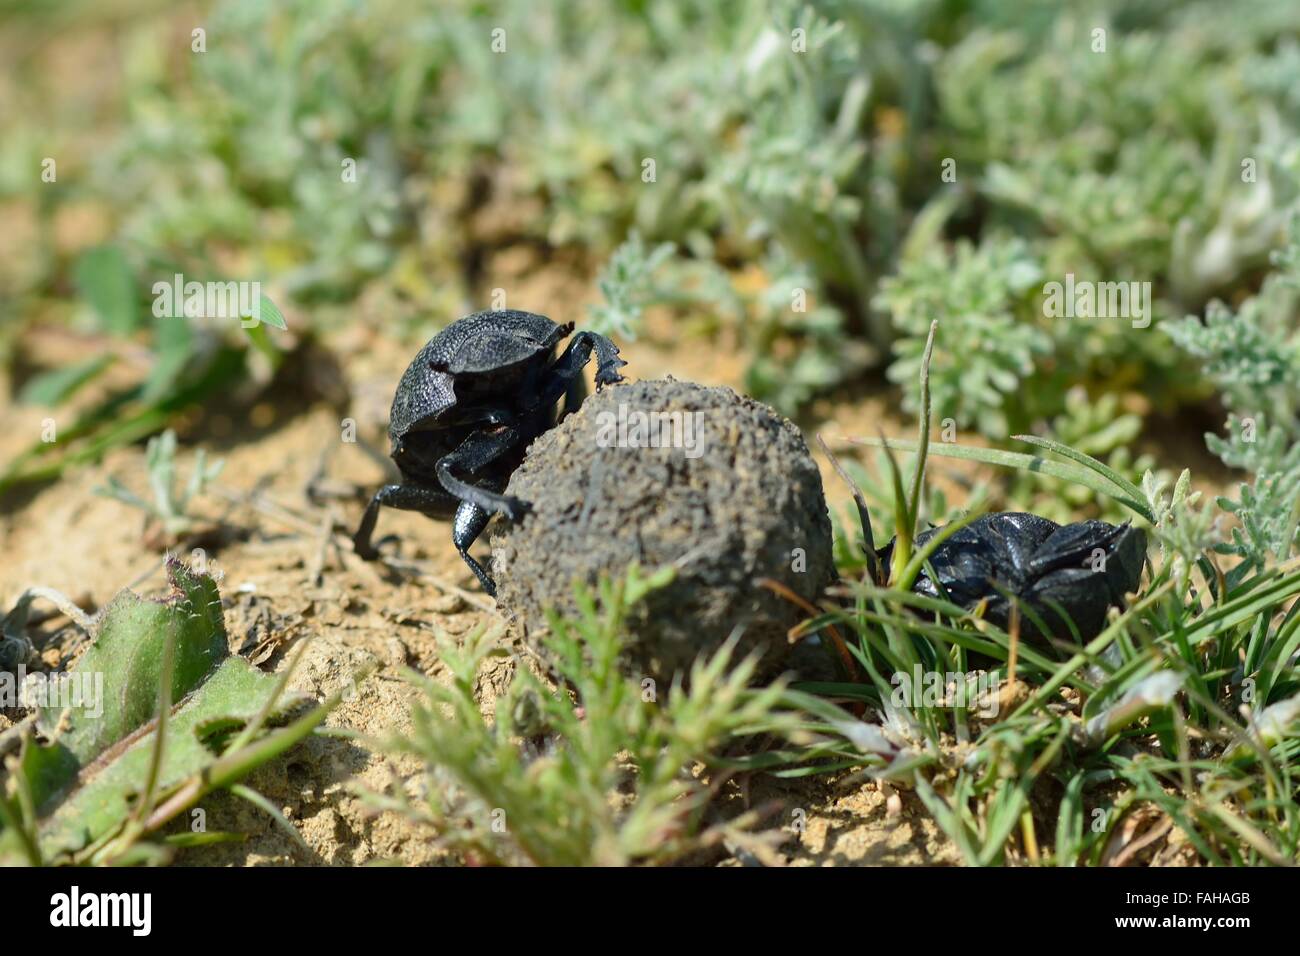 Dung beetles rolling a dung ball in Azerbaijan. A dung beetle moves a ball to a burrow after defeating a competitor Stock Photo